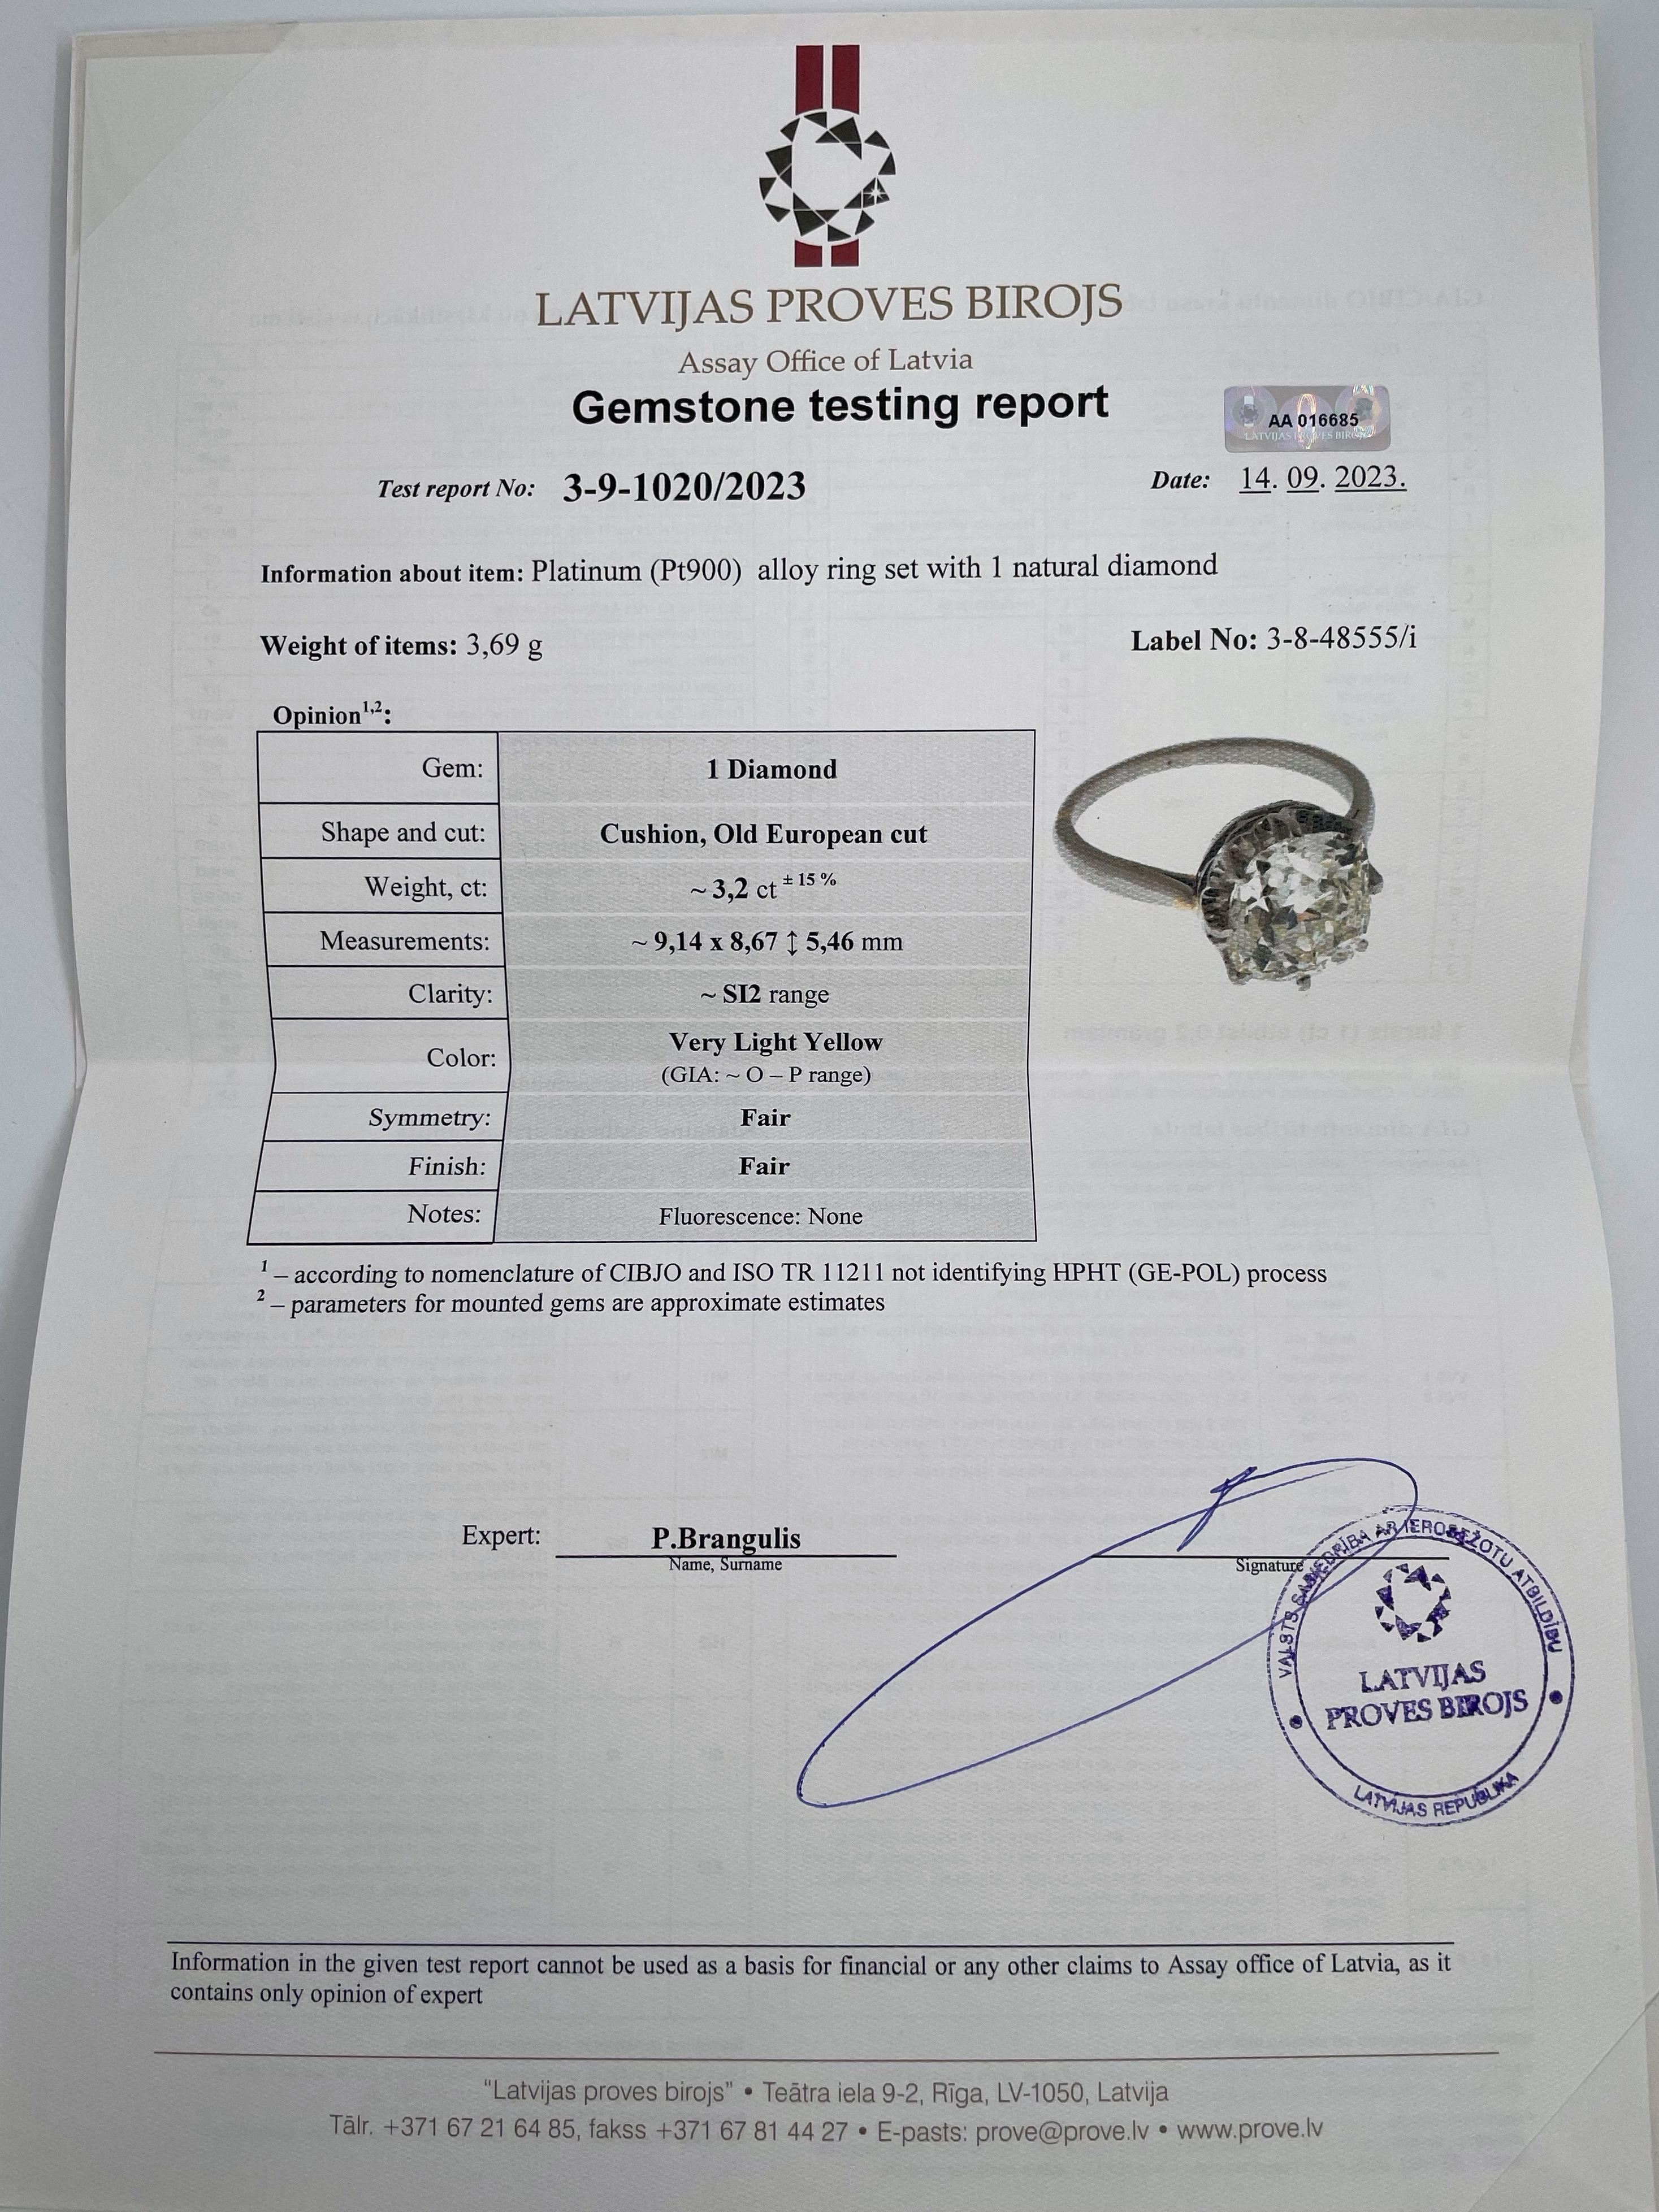 This is a magnificent solitaire ring crafted in 900 platinum. The piece is certified by the Assay Office with a gemstone testing report.

Diamond characteristics:
- shape and cut: Cushion, Old European cut
- weight: 3.2ct 
- measurements: